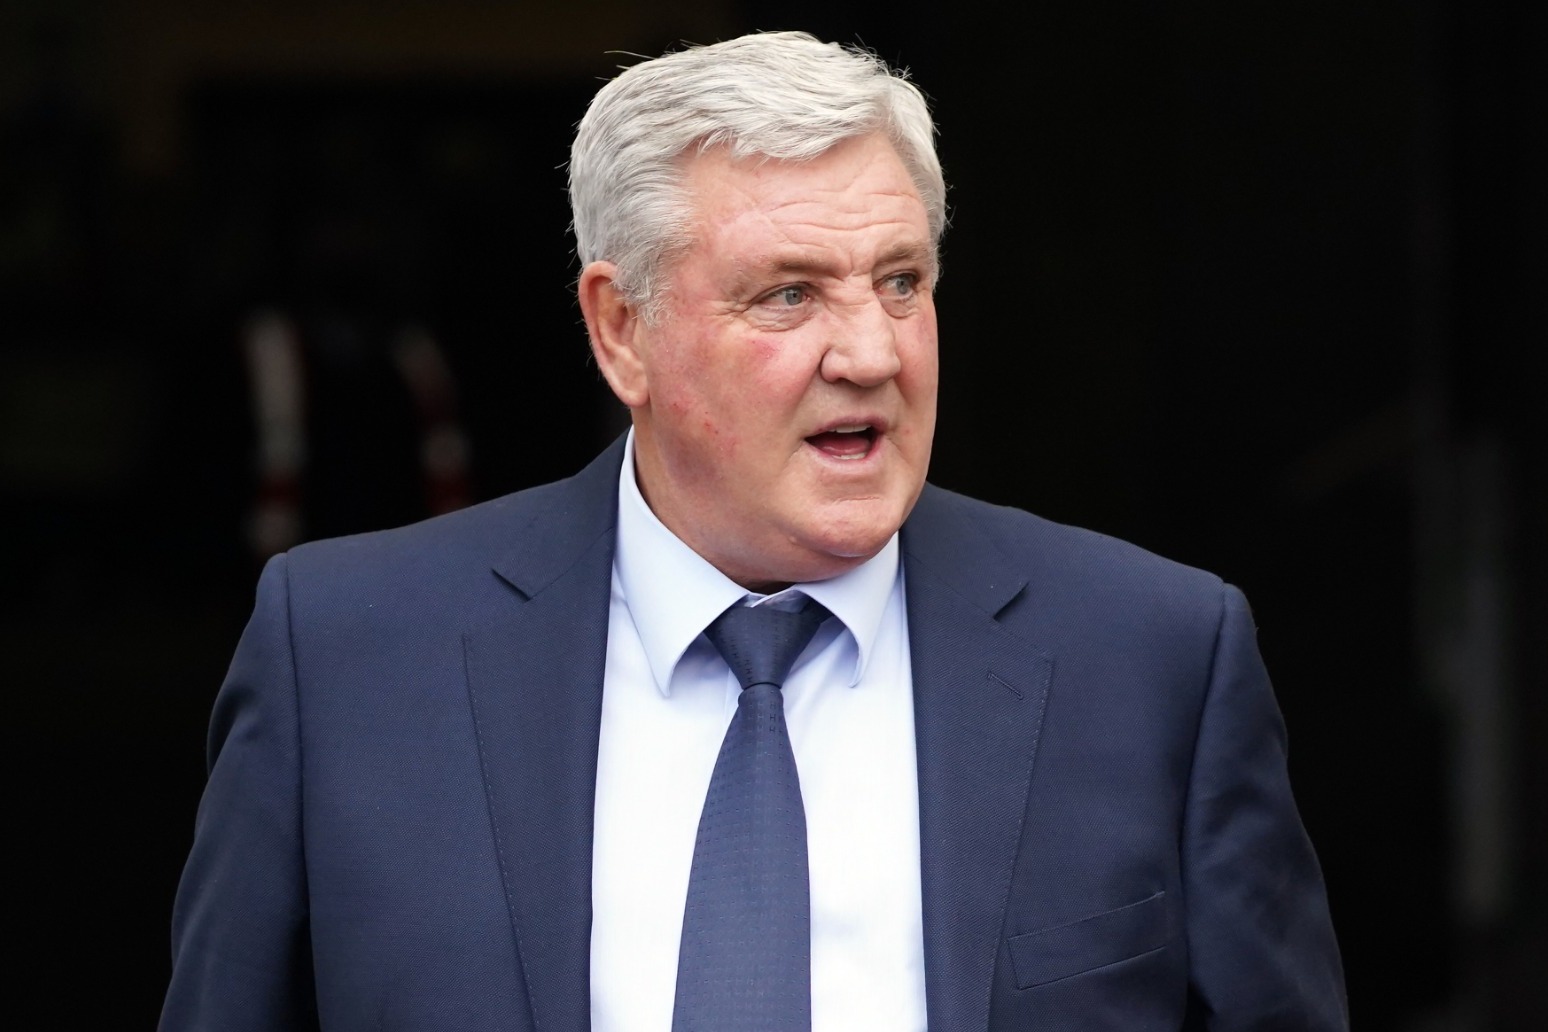 Steve Bruce appointed West Brom manager on 18-month deal 